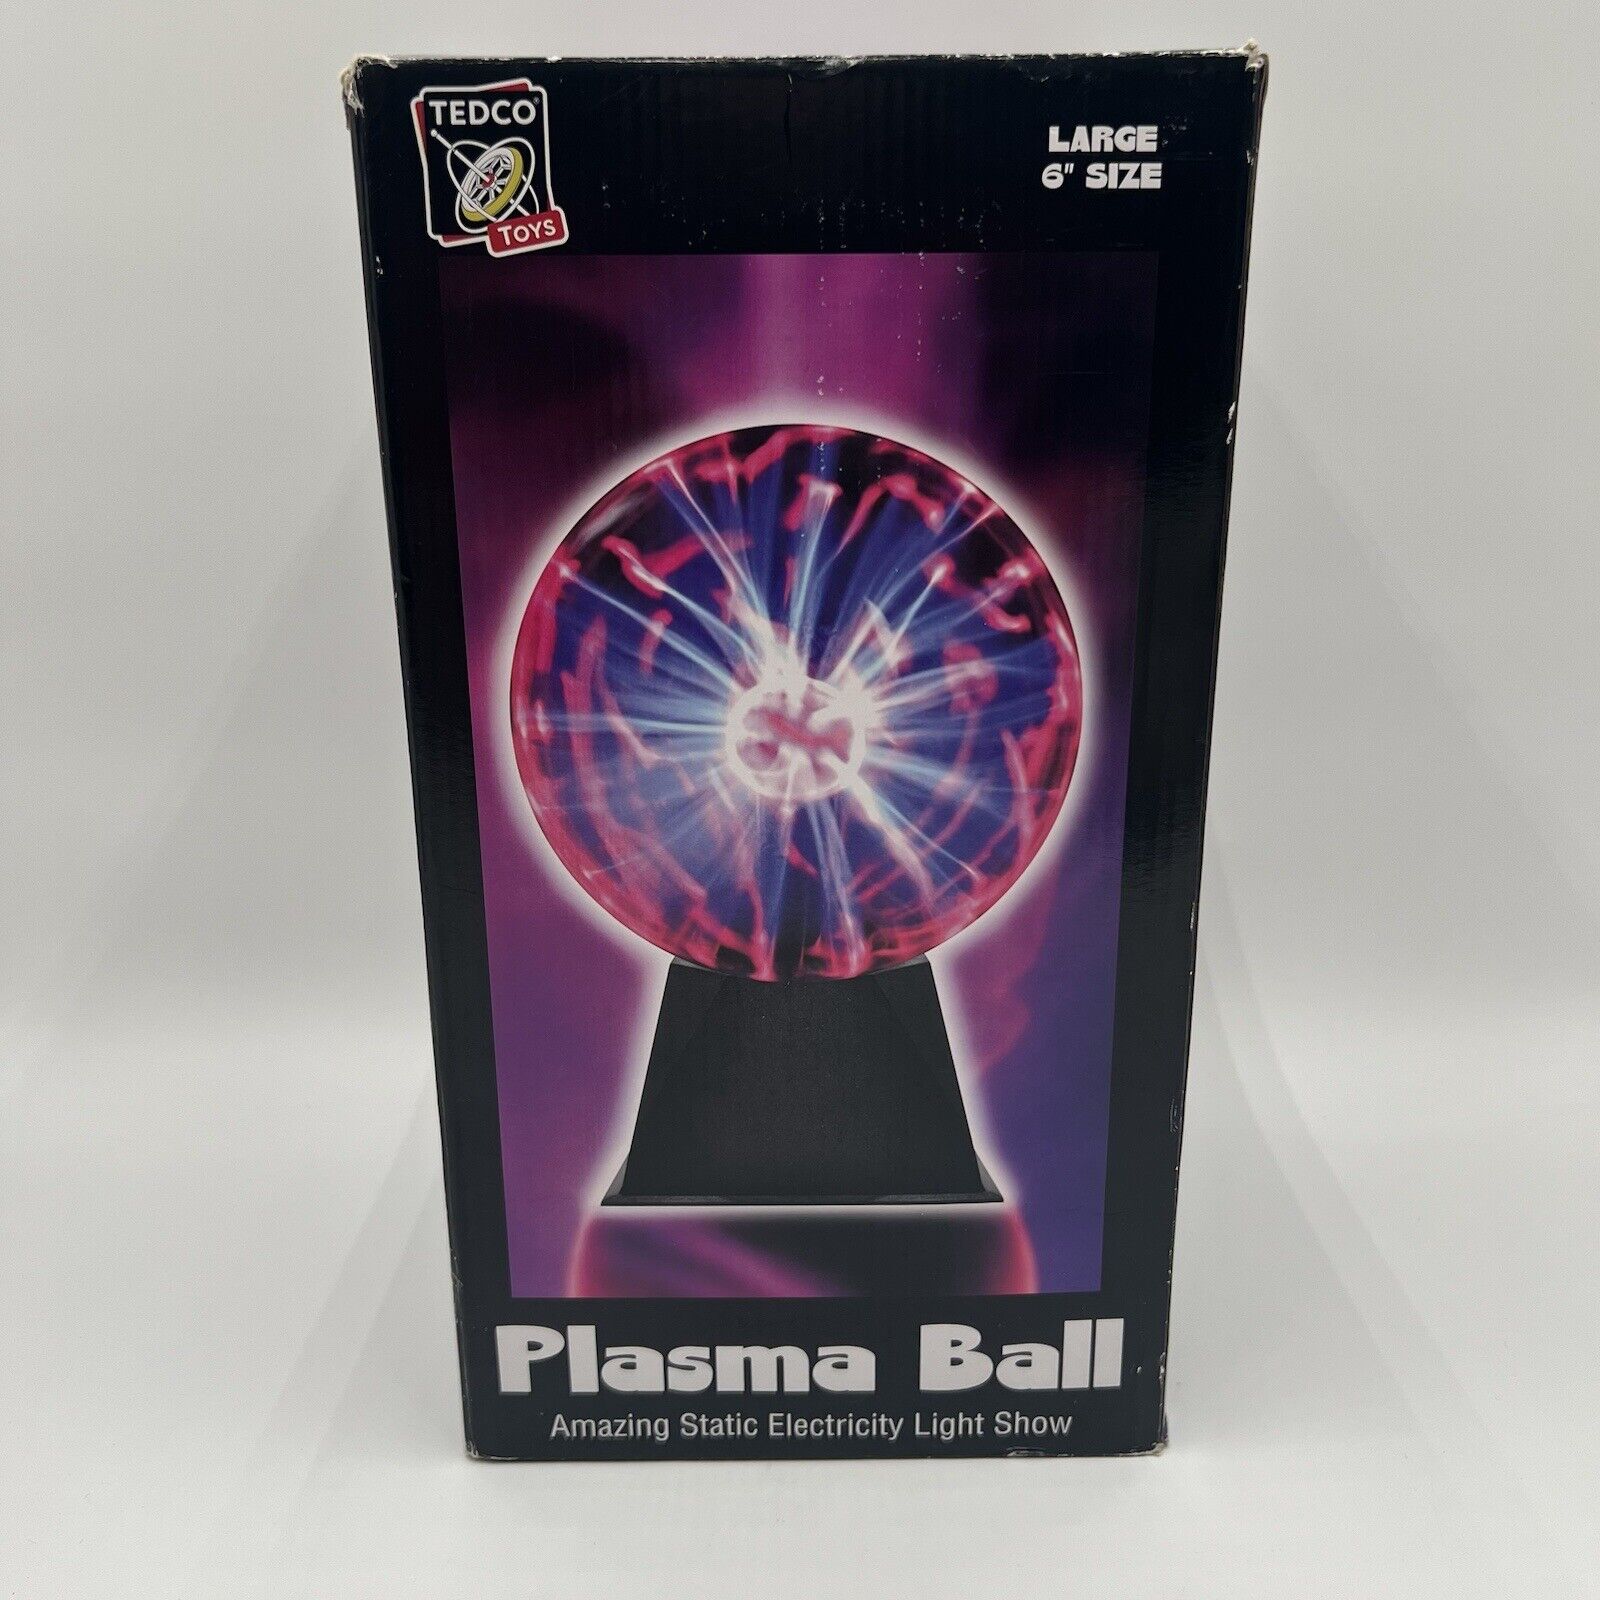 Plasma Ball 6” Large Tedco Toys Tested In Original Box